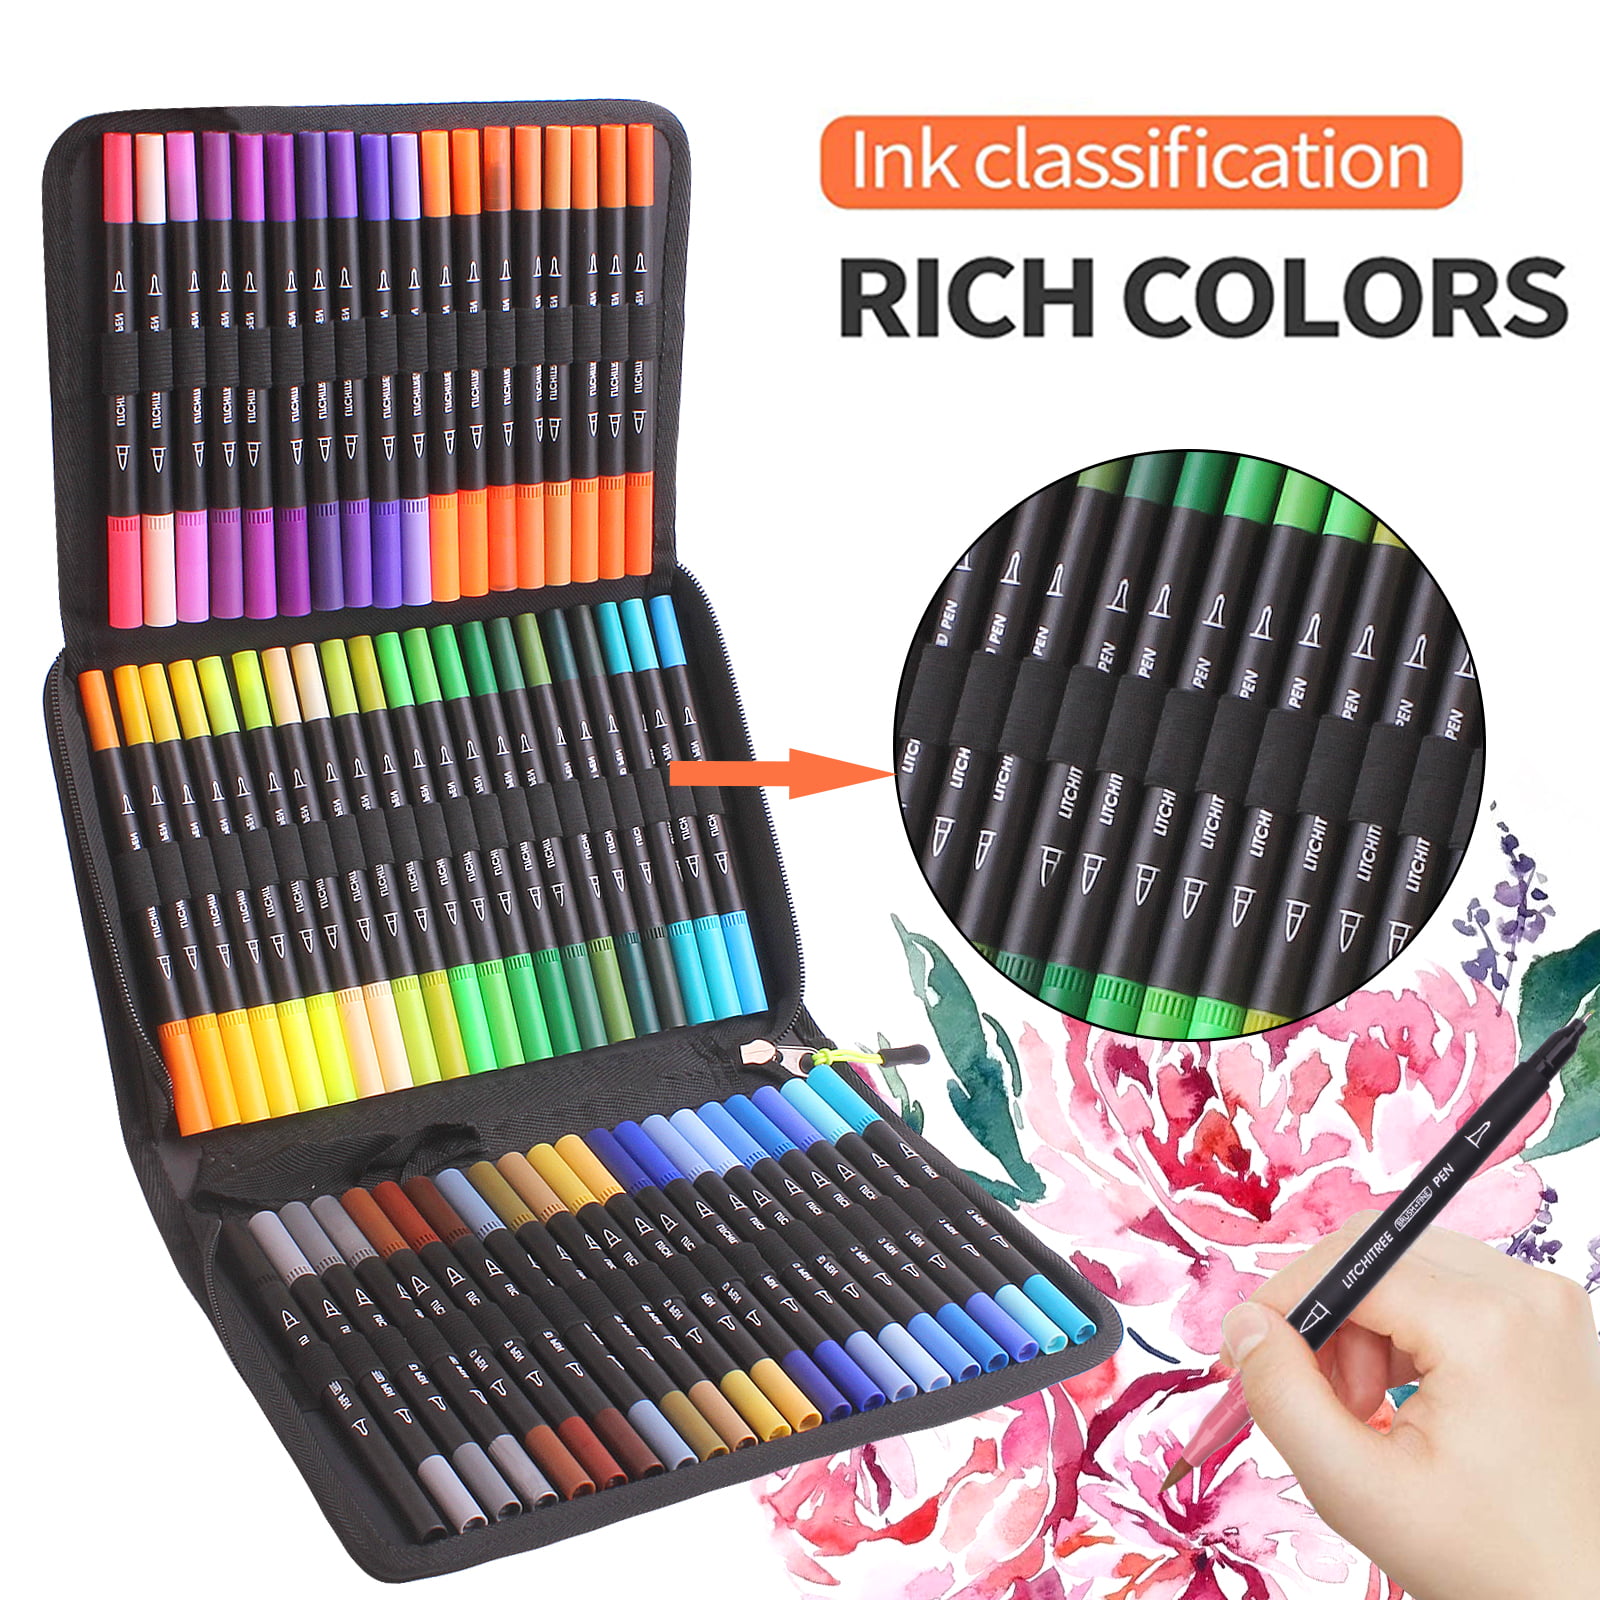 36 Colors Dual Tip Brush Art Marker Pens Coloring Markers Fine & Brush Tip  Pen for Adult Coloring Book Note Taking Art Supplier - AliExpress